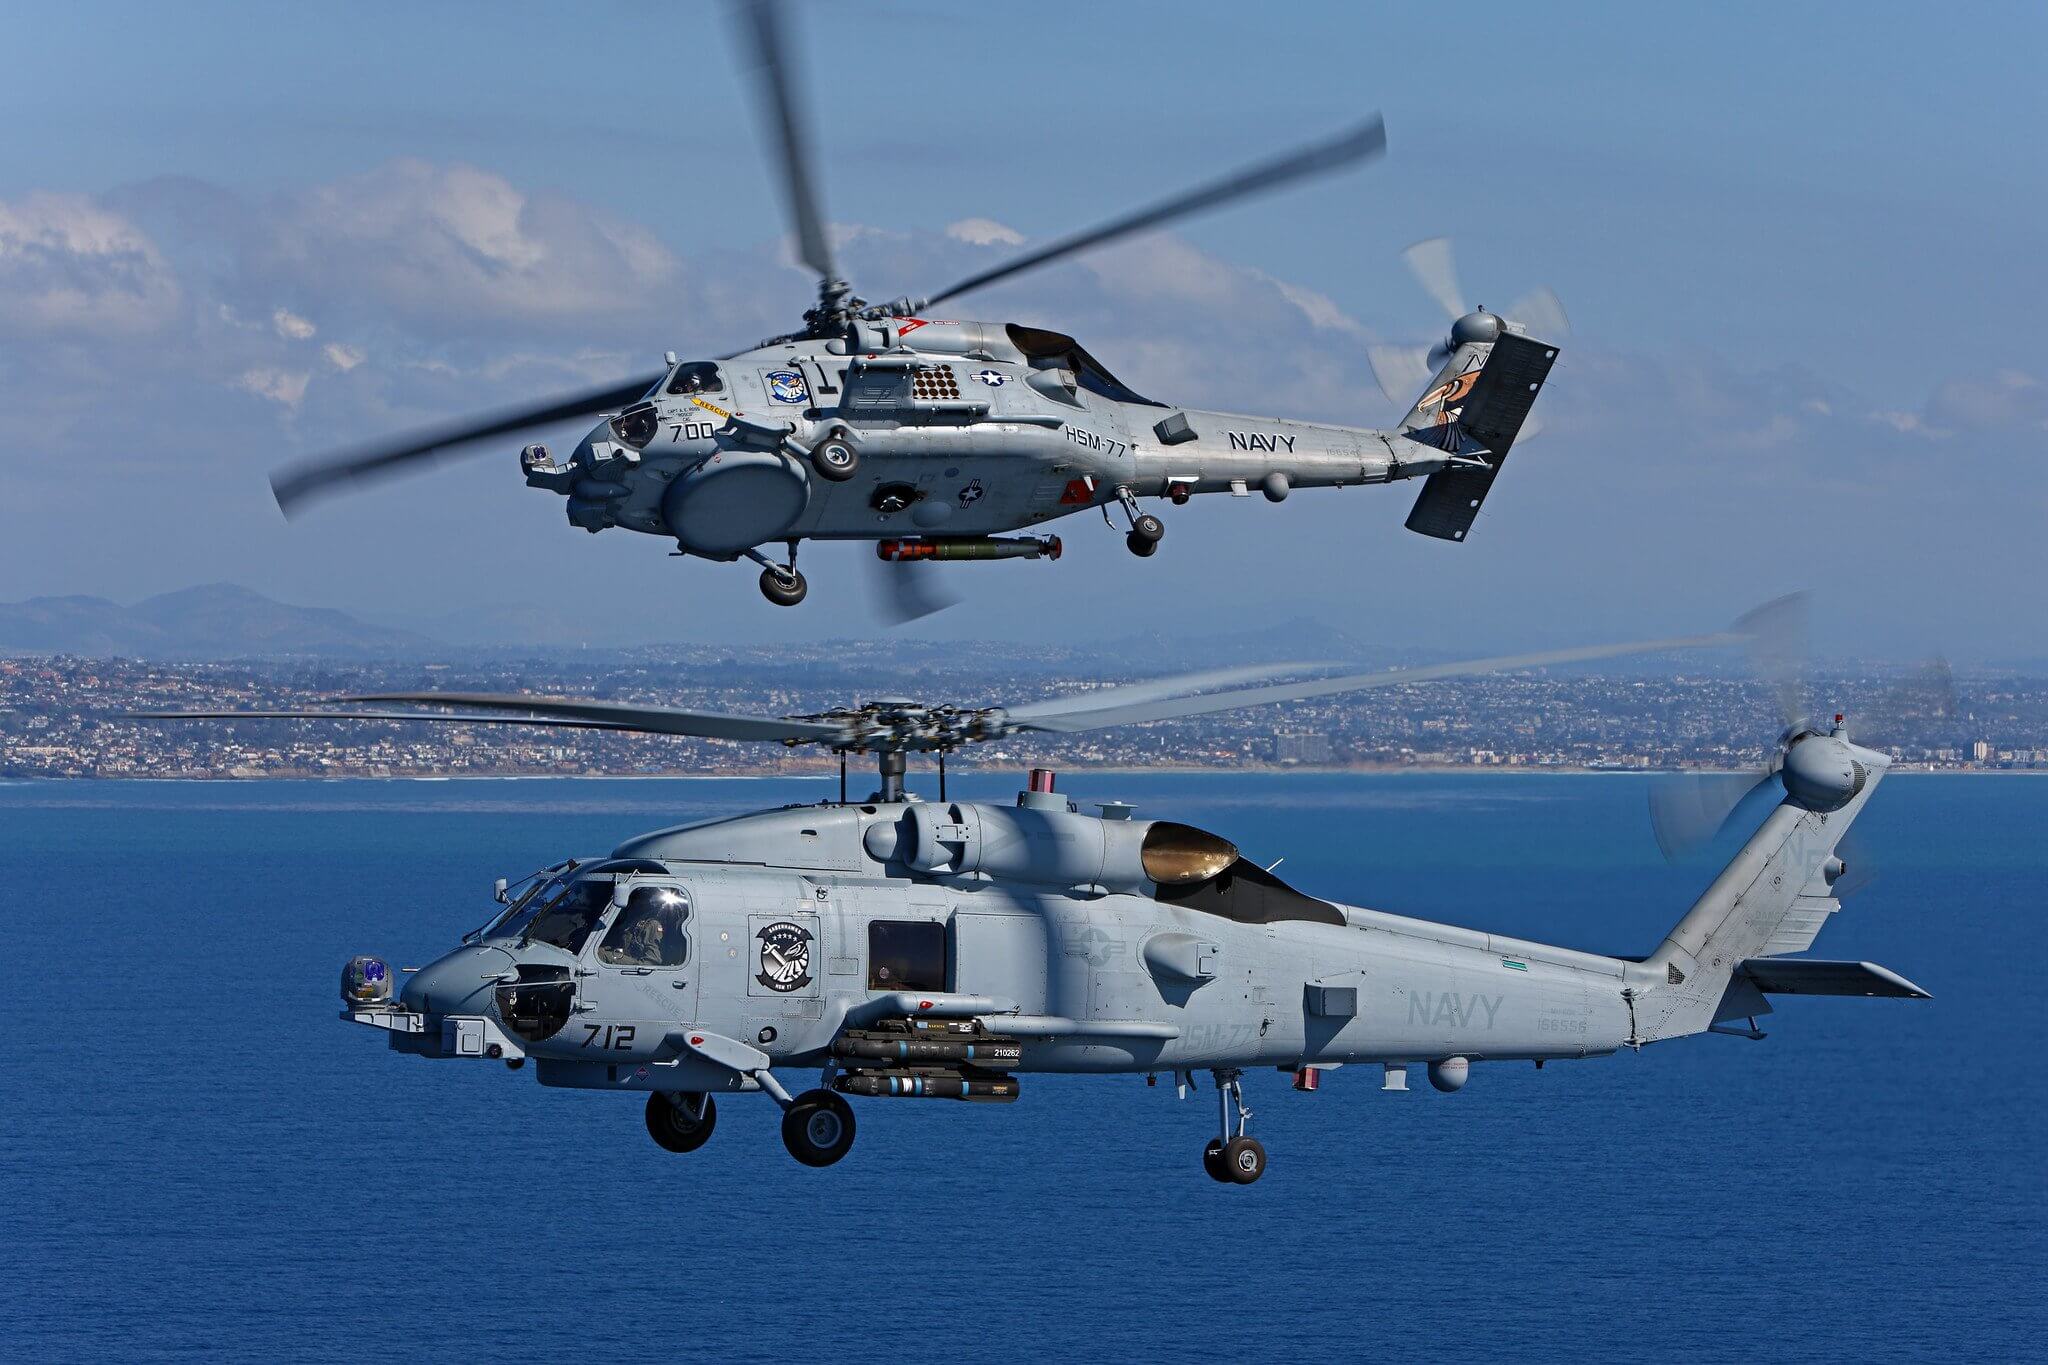 The MH-60R is operational and deployed today with the U.S. Navy as the primary anti-submarine warfare anti-surface weapon system for open ocean and littoral zones. Lockheed Martin Photo 